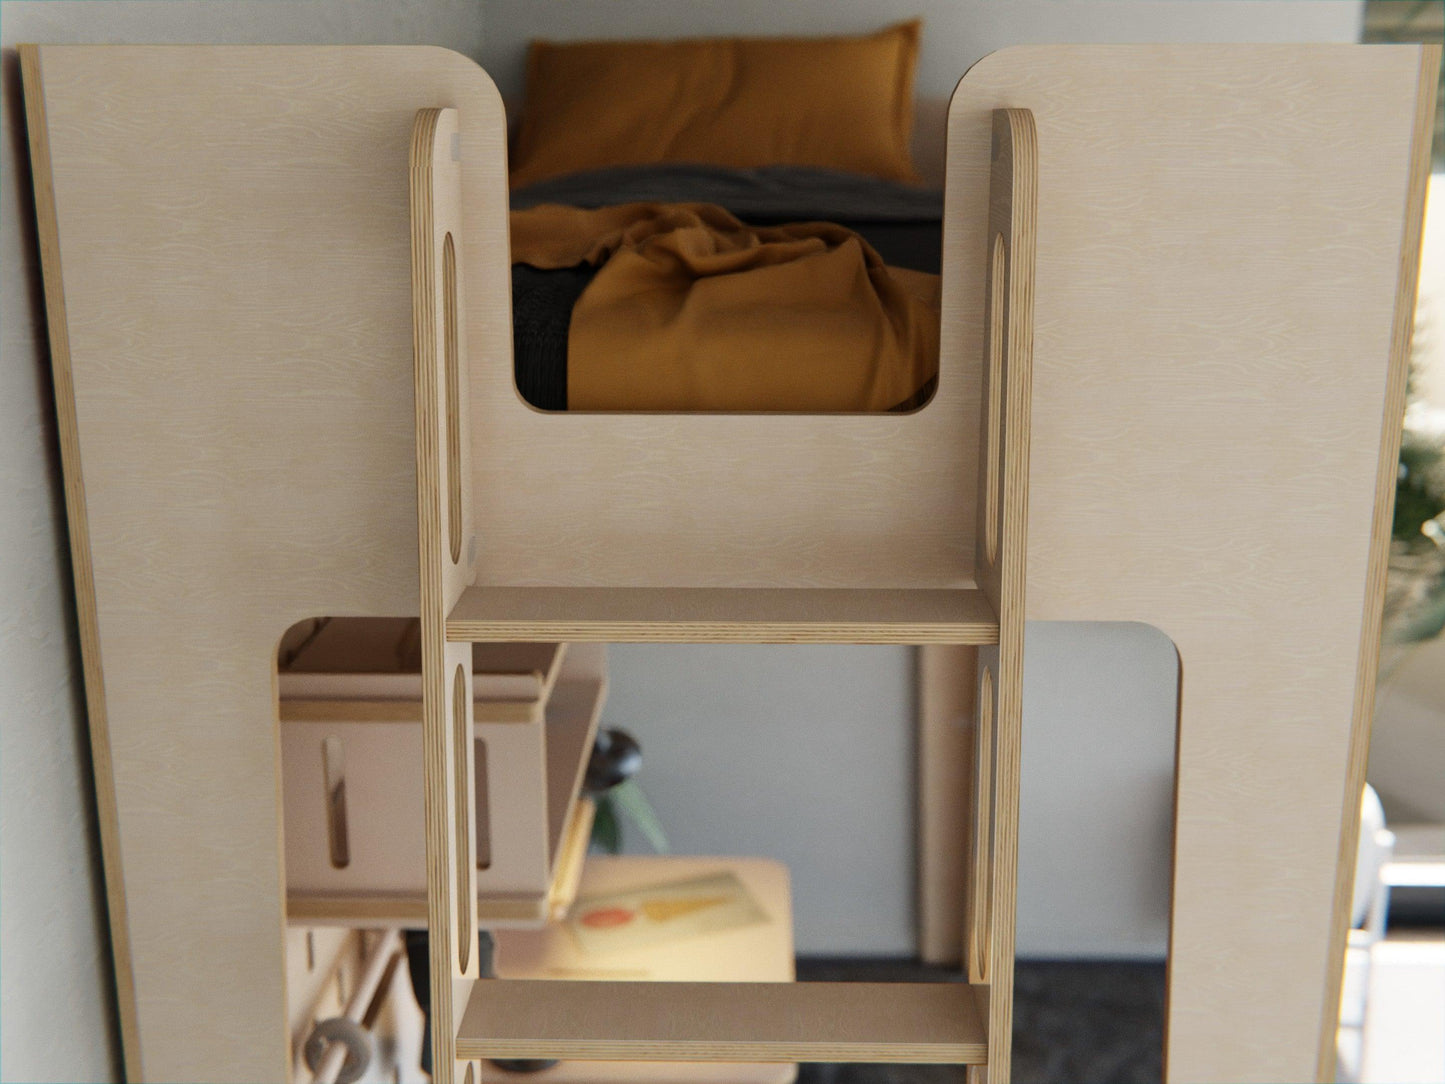 Explore our modern plywood loft bed - a stylish sanctuary that your kids will love.